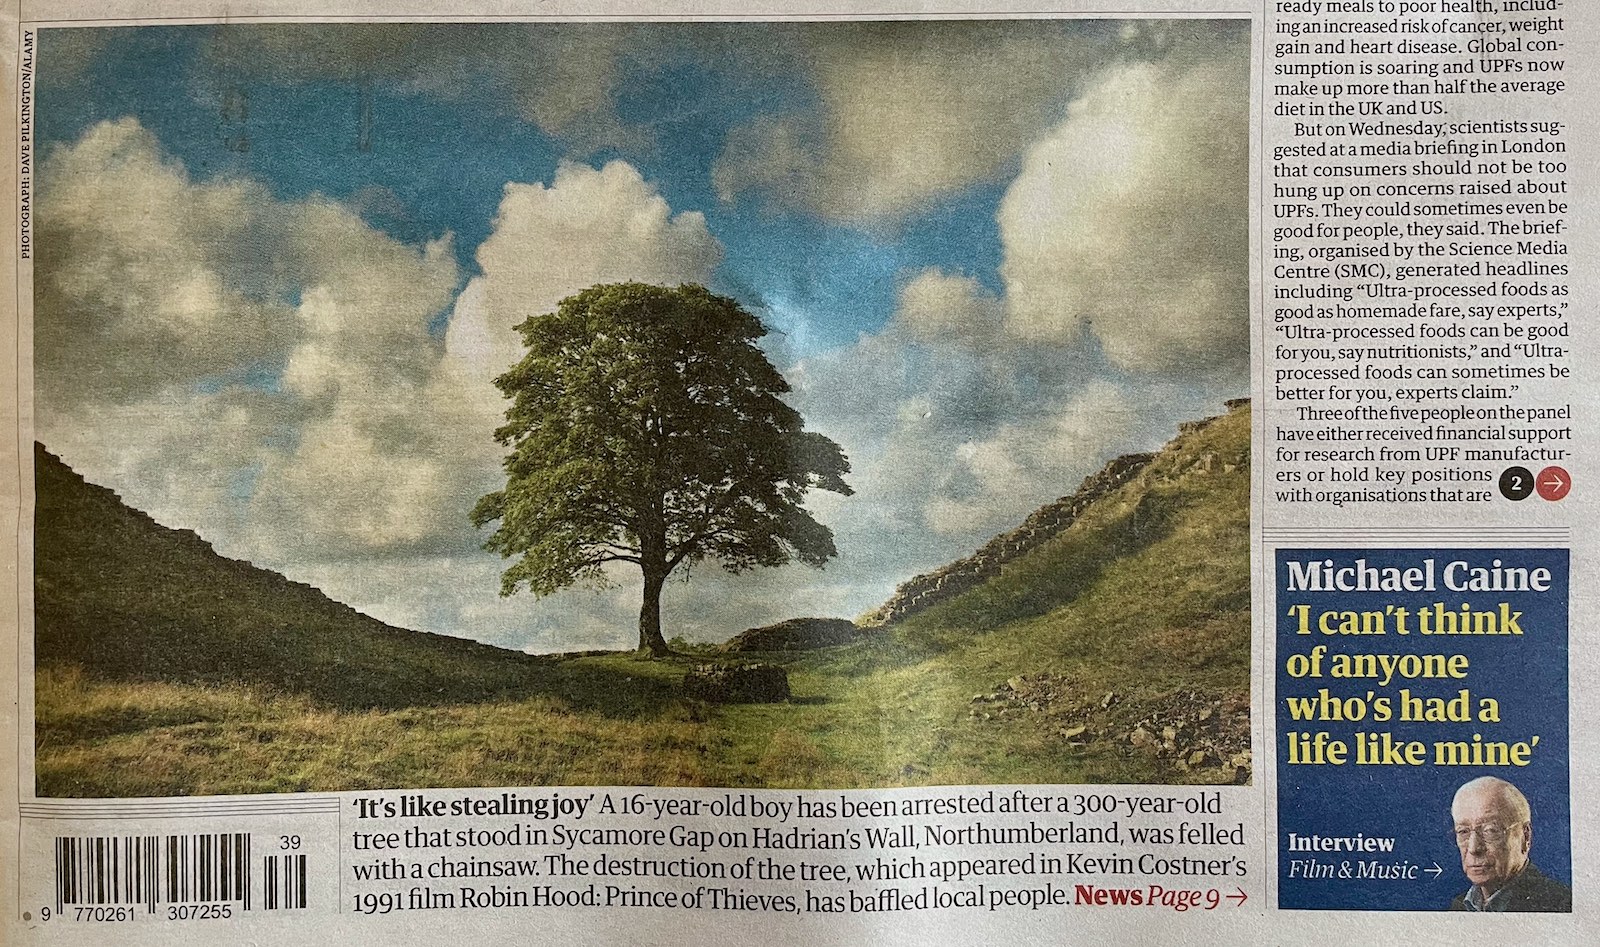 The Guardian's coverage of the tree felling